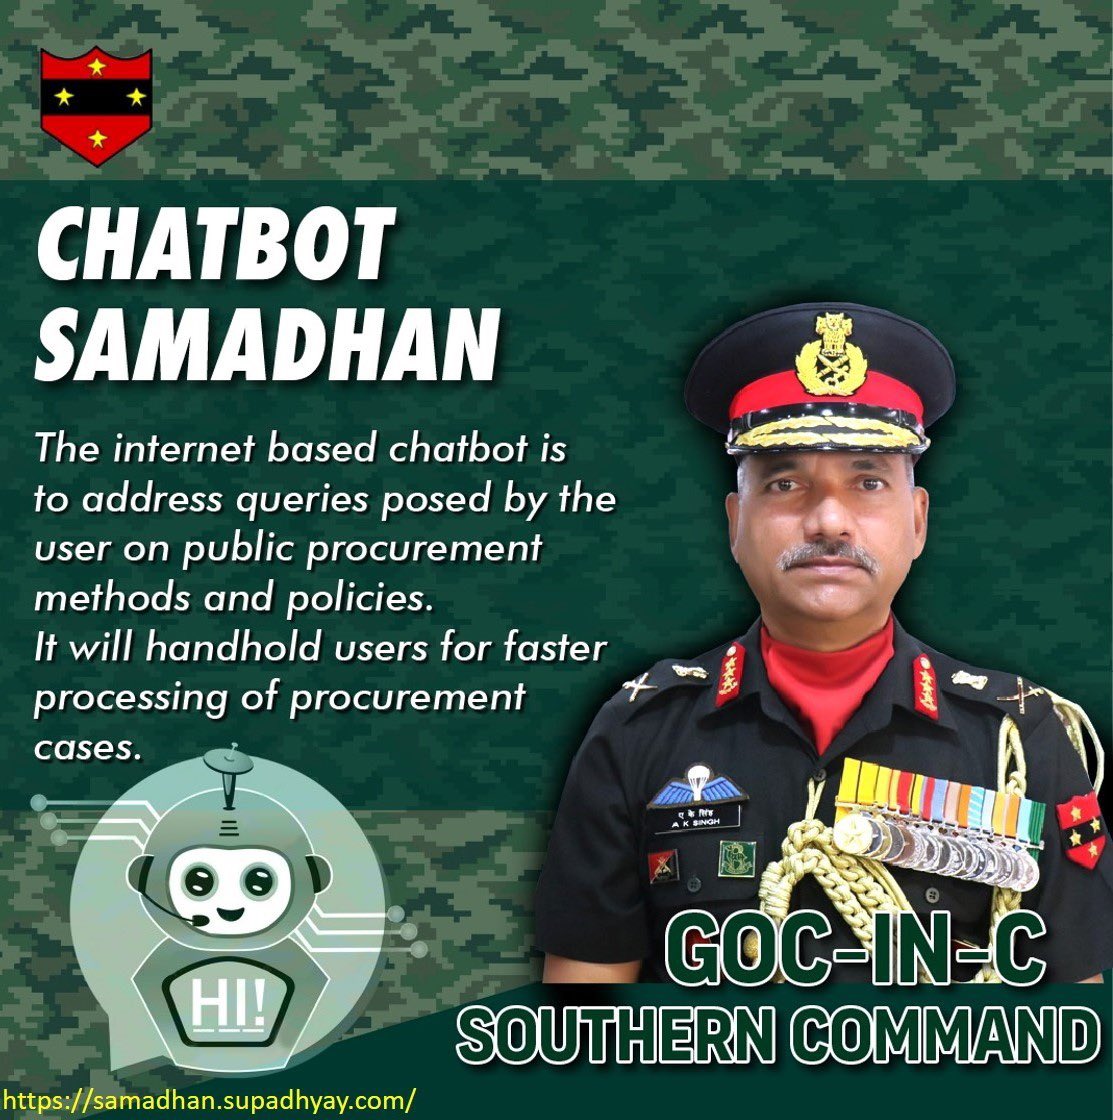 ‘CHATBOT SAMADHAN’
#Agnipathscheme
Lt Gen AK Singh, #ArmyCommander #SouthernCommand released an #AI based #Internet #Chatbot to address the queries and handhold users on #PublicProcurement & #Policies. Empowering efficiency and accessibility in the process.
#ChatbotSamadhan